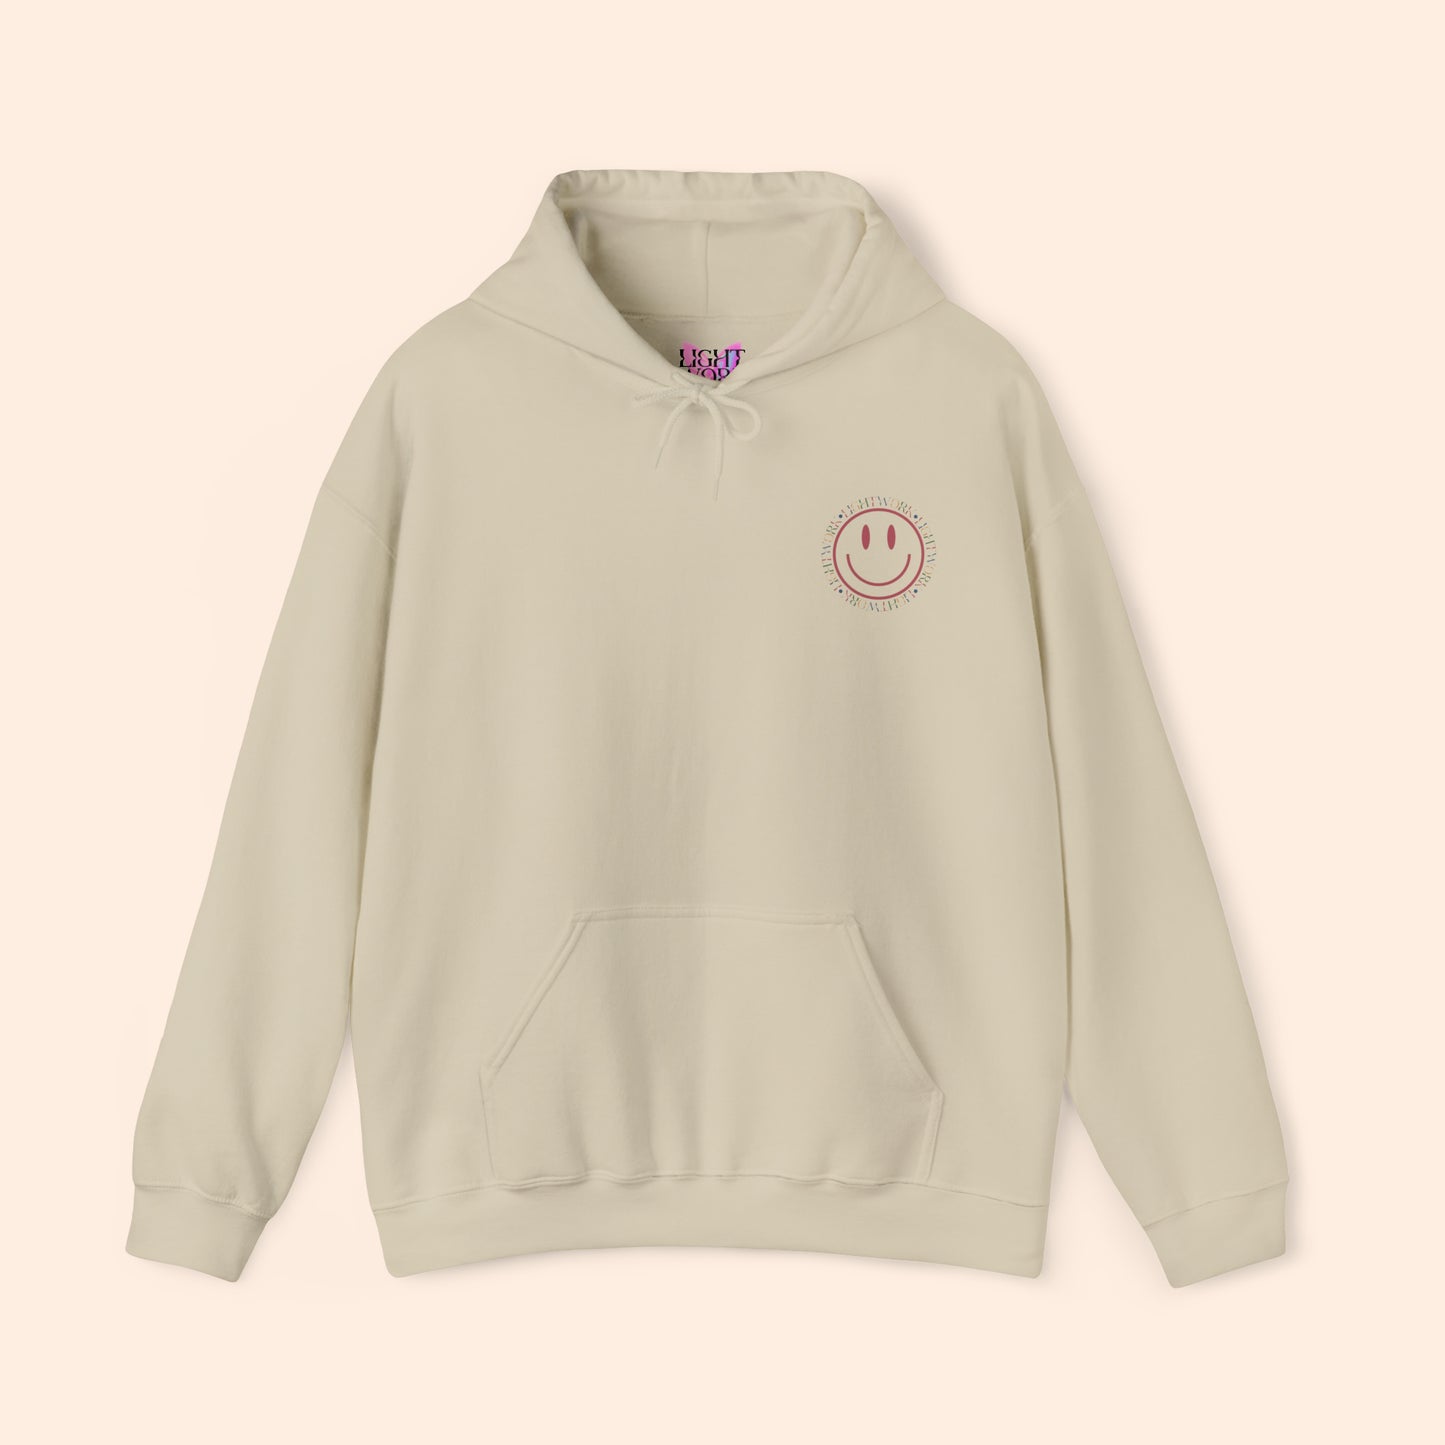 Do What Makes You Happy Hoodie